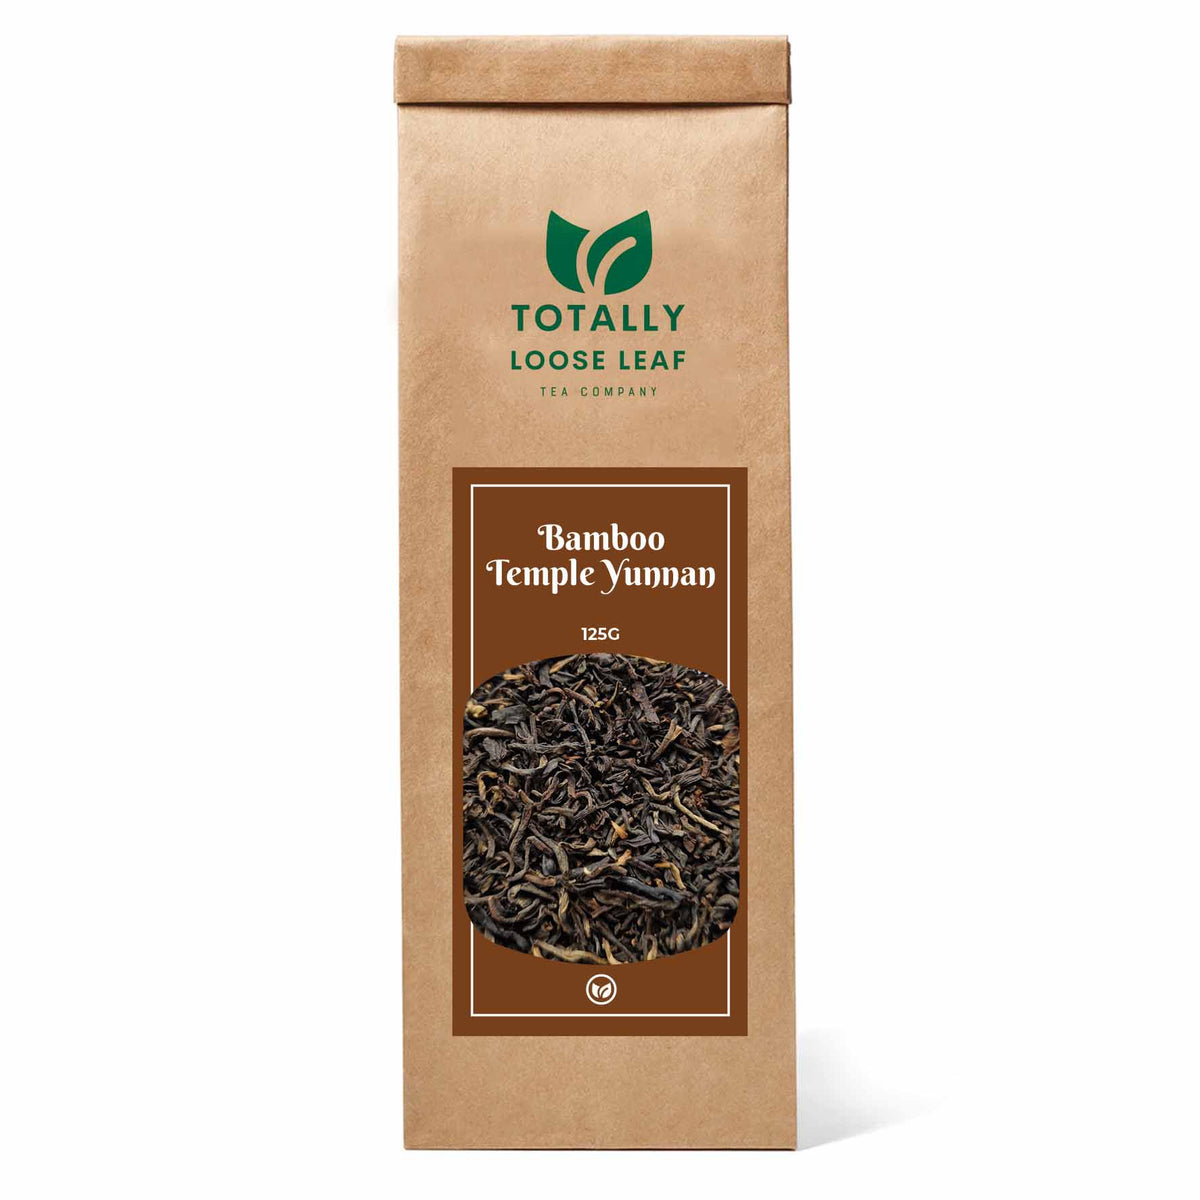 Bamboo Temple Yunnan Black Loose Leaf Tea - one pouch